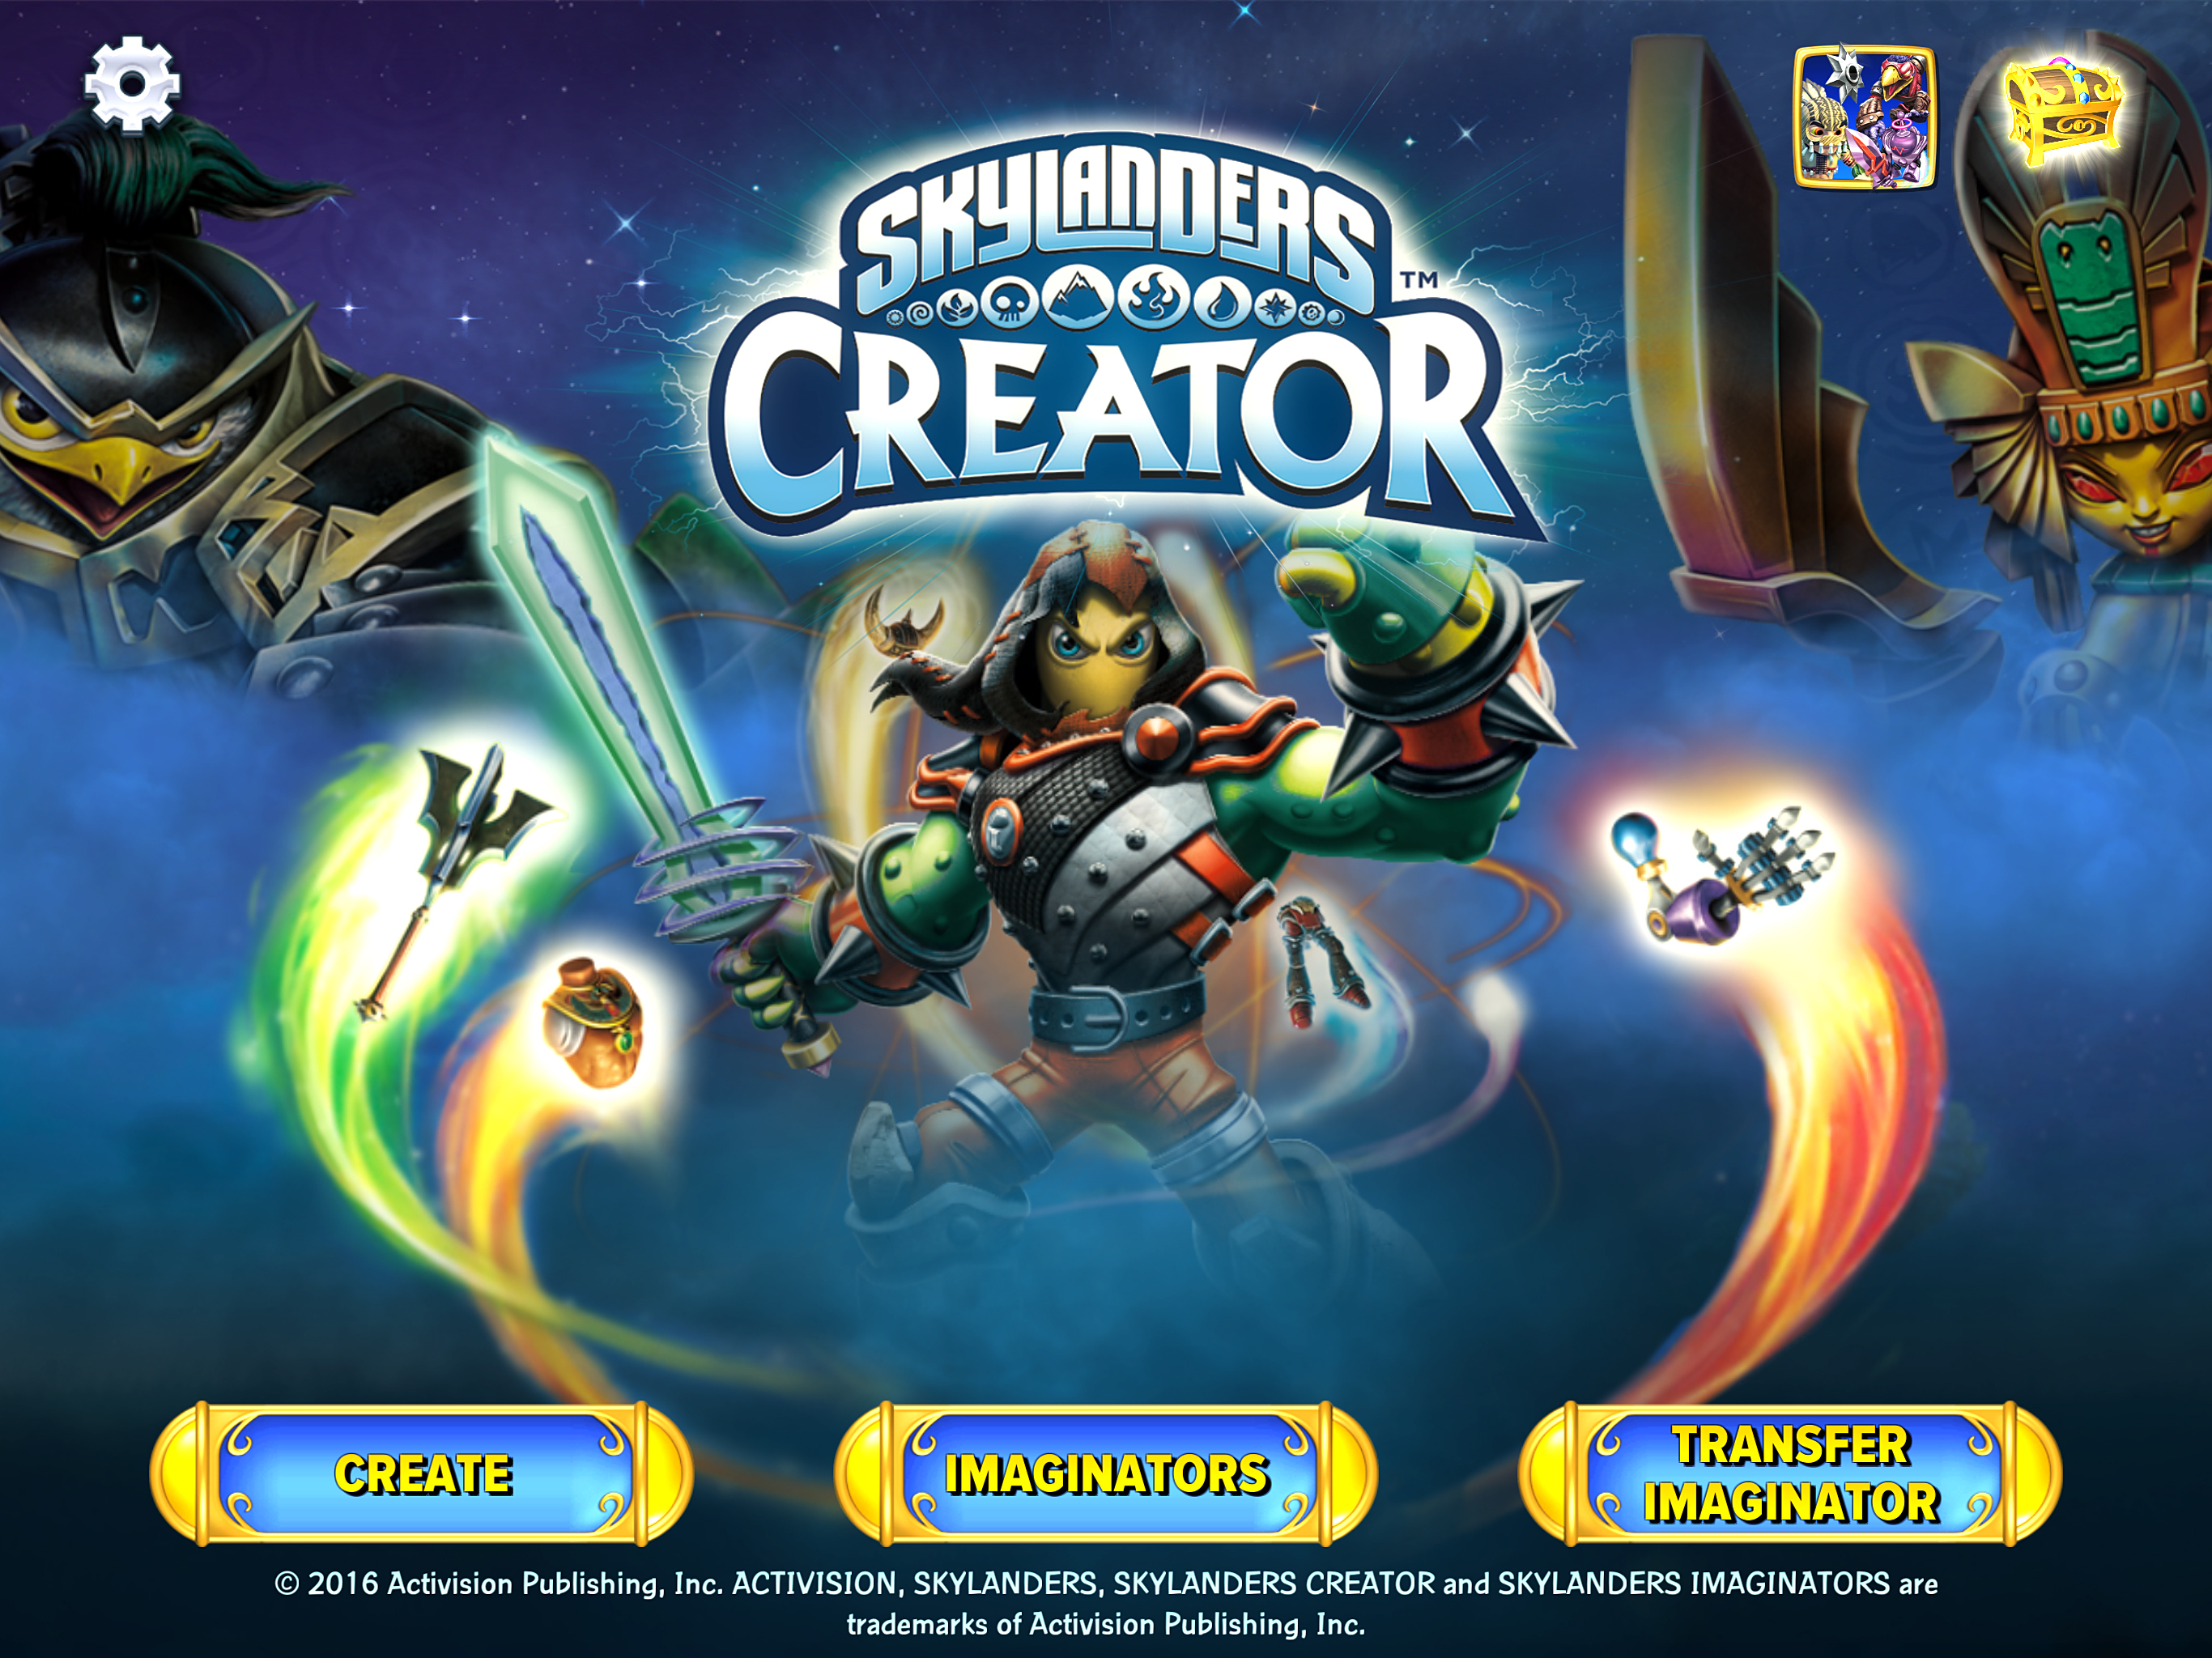 will there be a new skylanders game